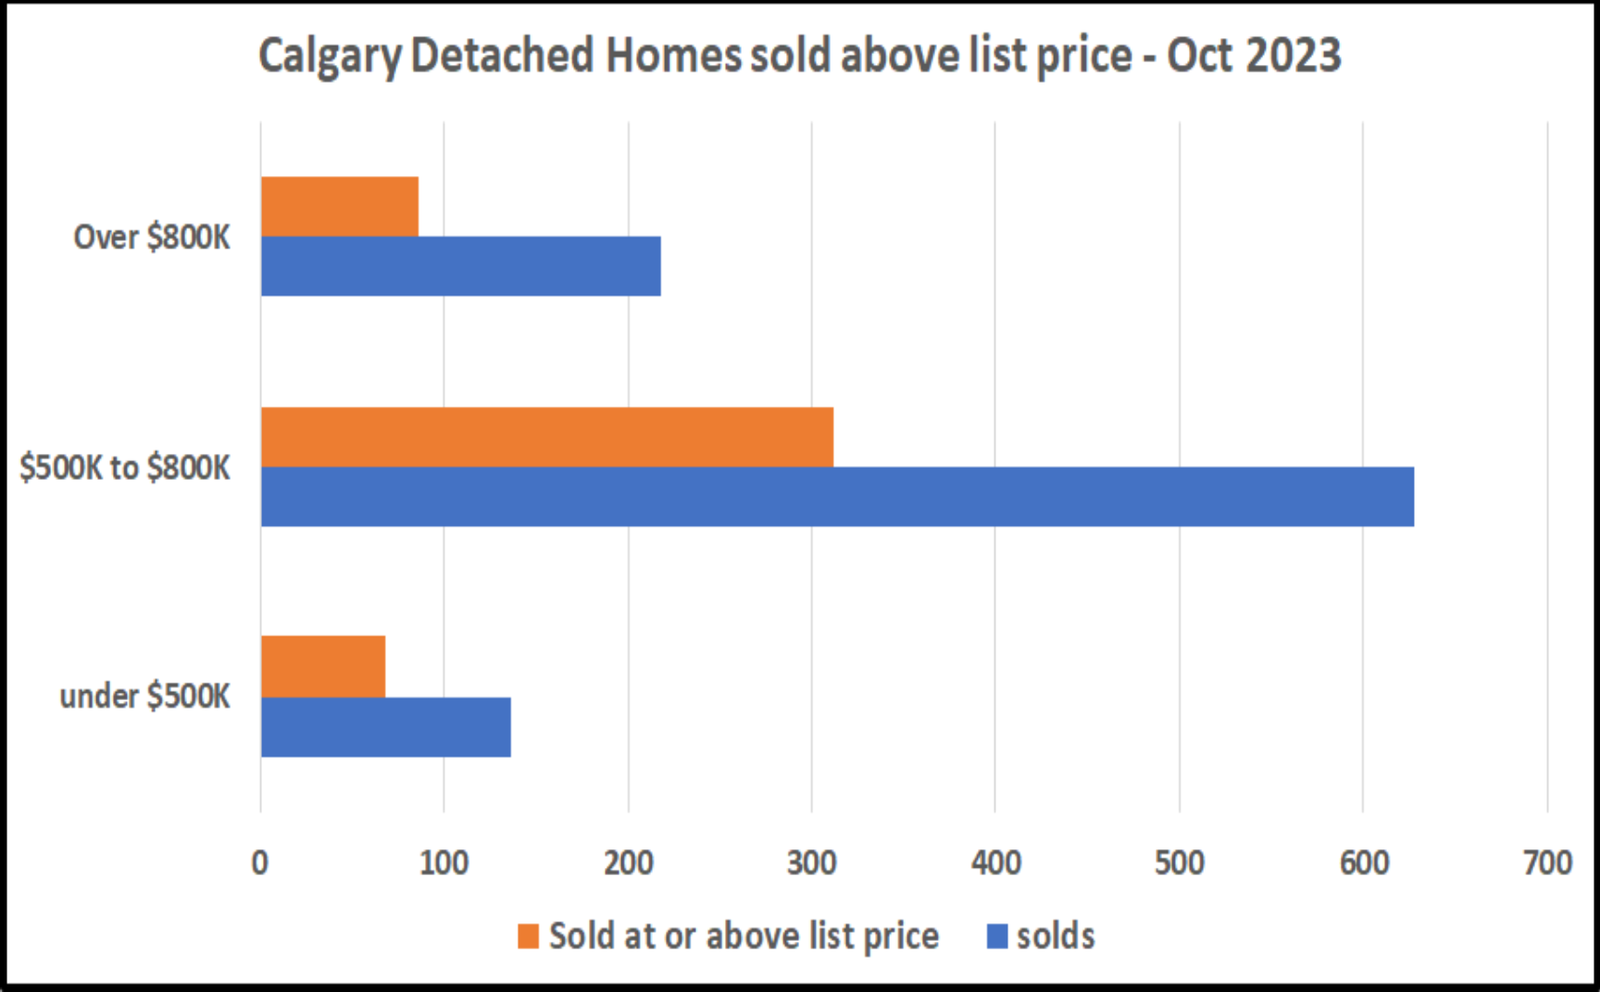 Calgary Detached Homes sold above list price in October 2023